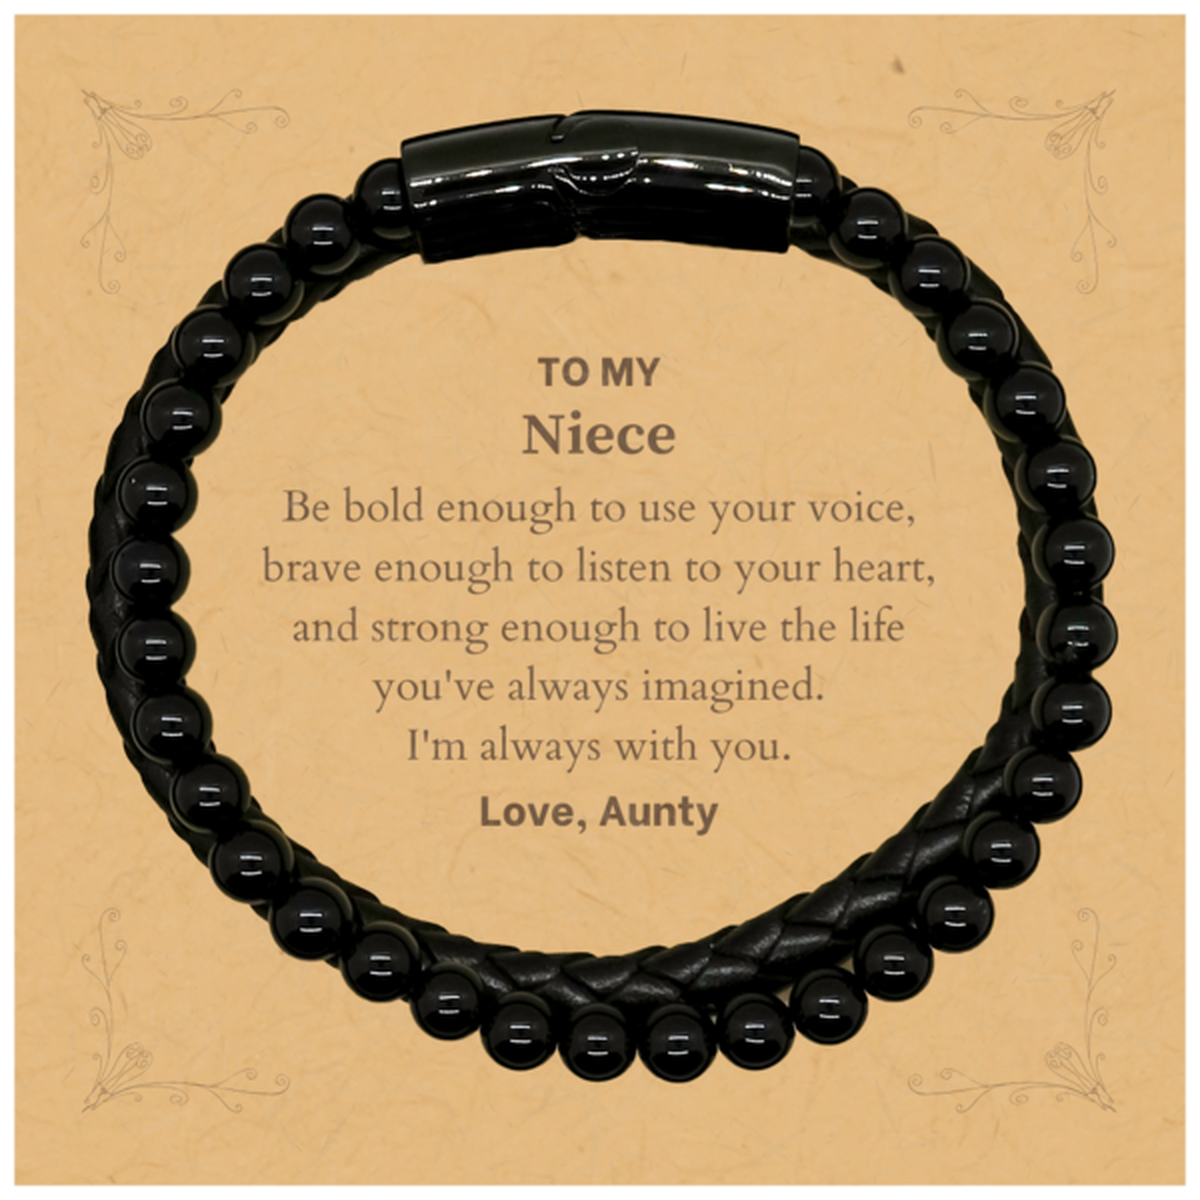 Keepsake Niece Stone Leather Bracelets Gift Idea Graduation Christmas Birthday Niece from Aunty, Niece Be bold enough to use your voice, brave enough to listen to your heart. Love, Aunty